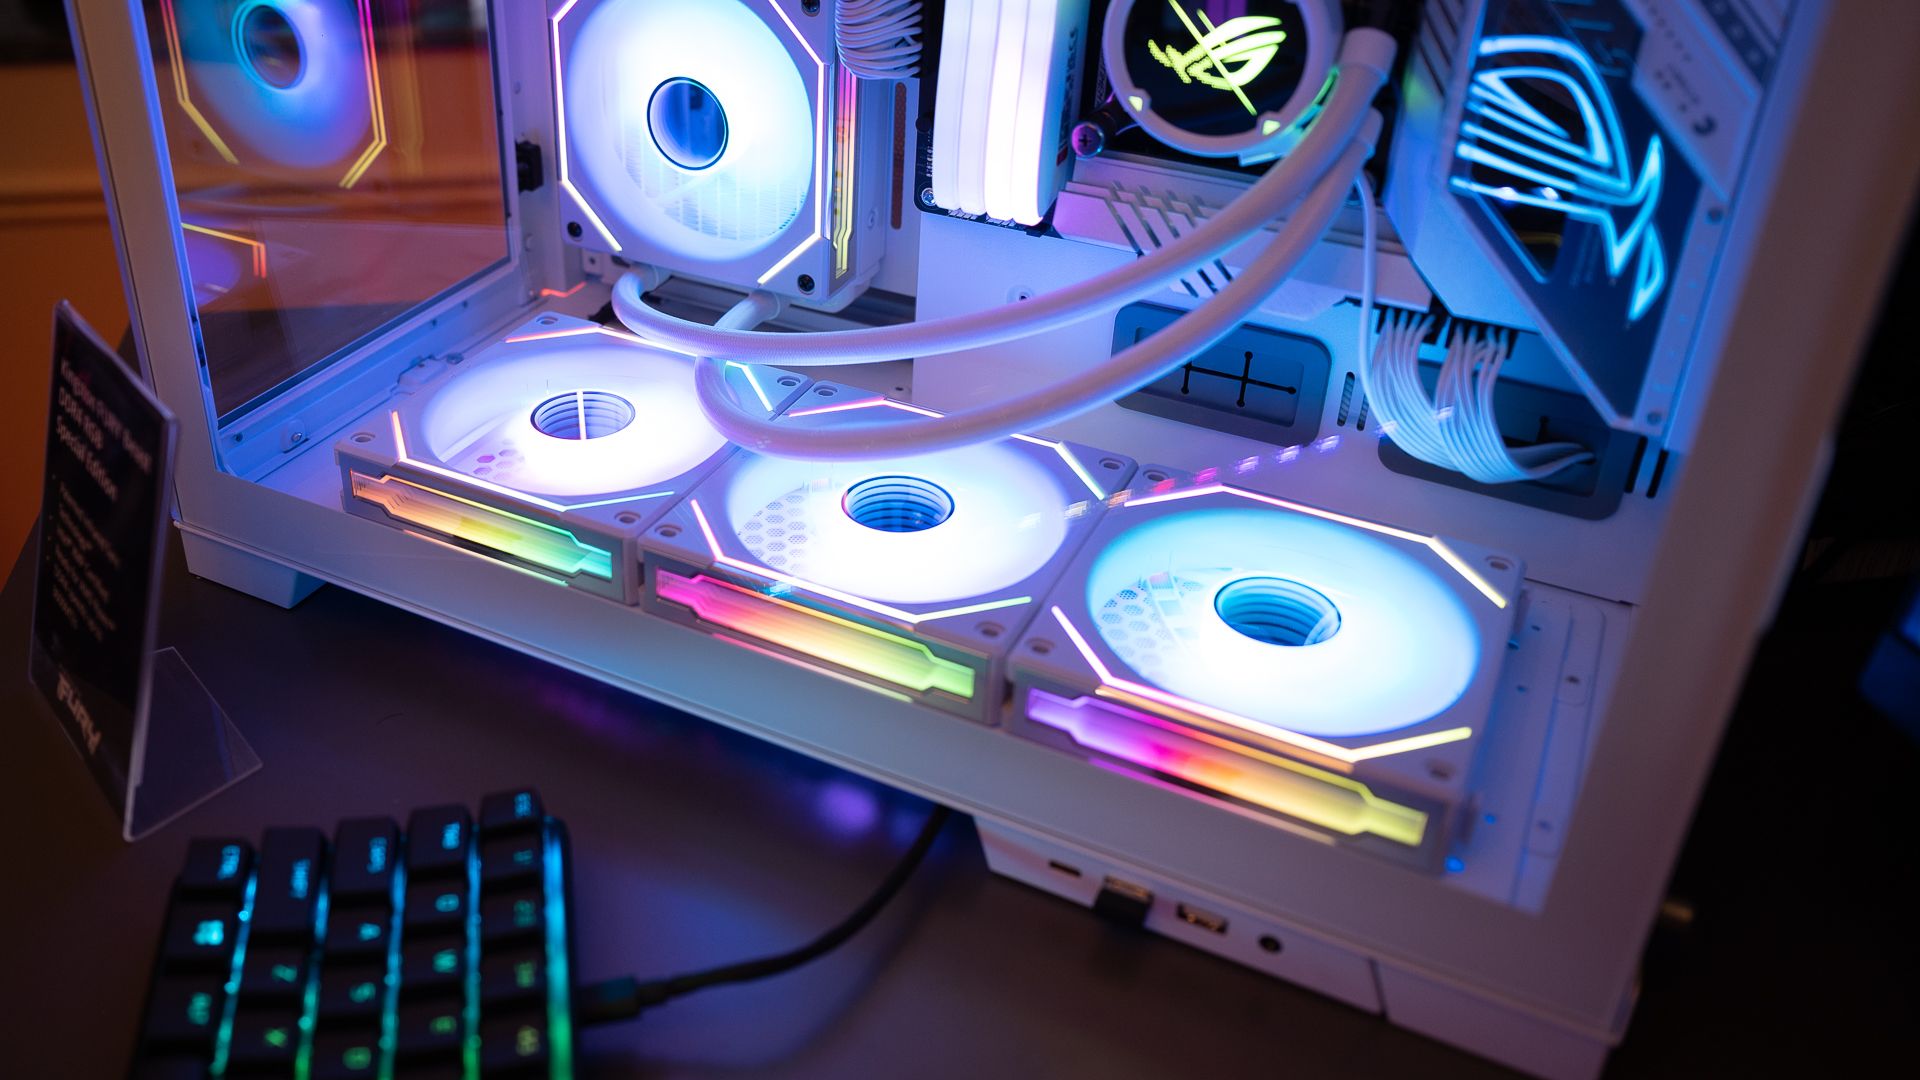 RGB fans inside a gaming PC.